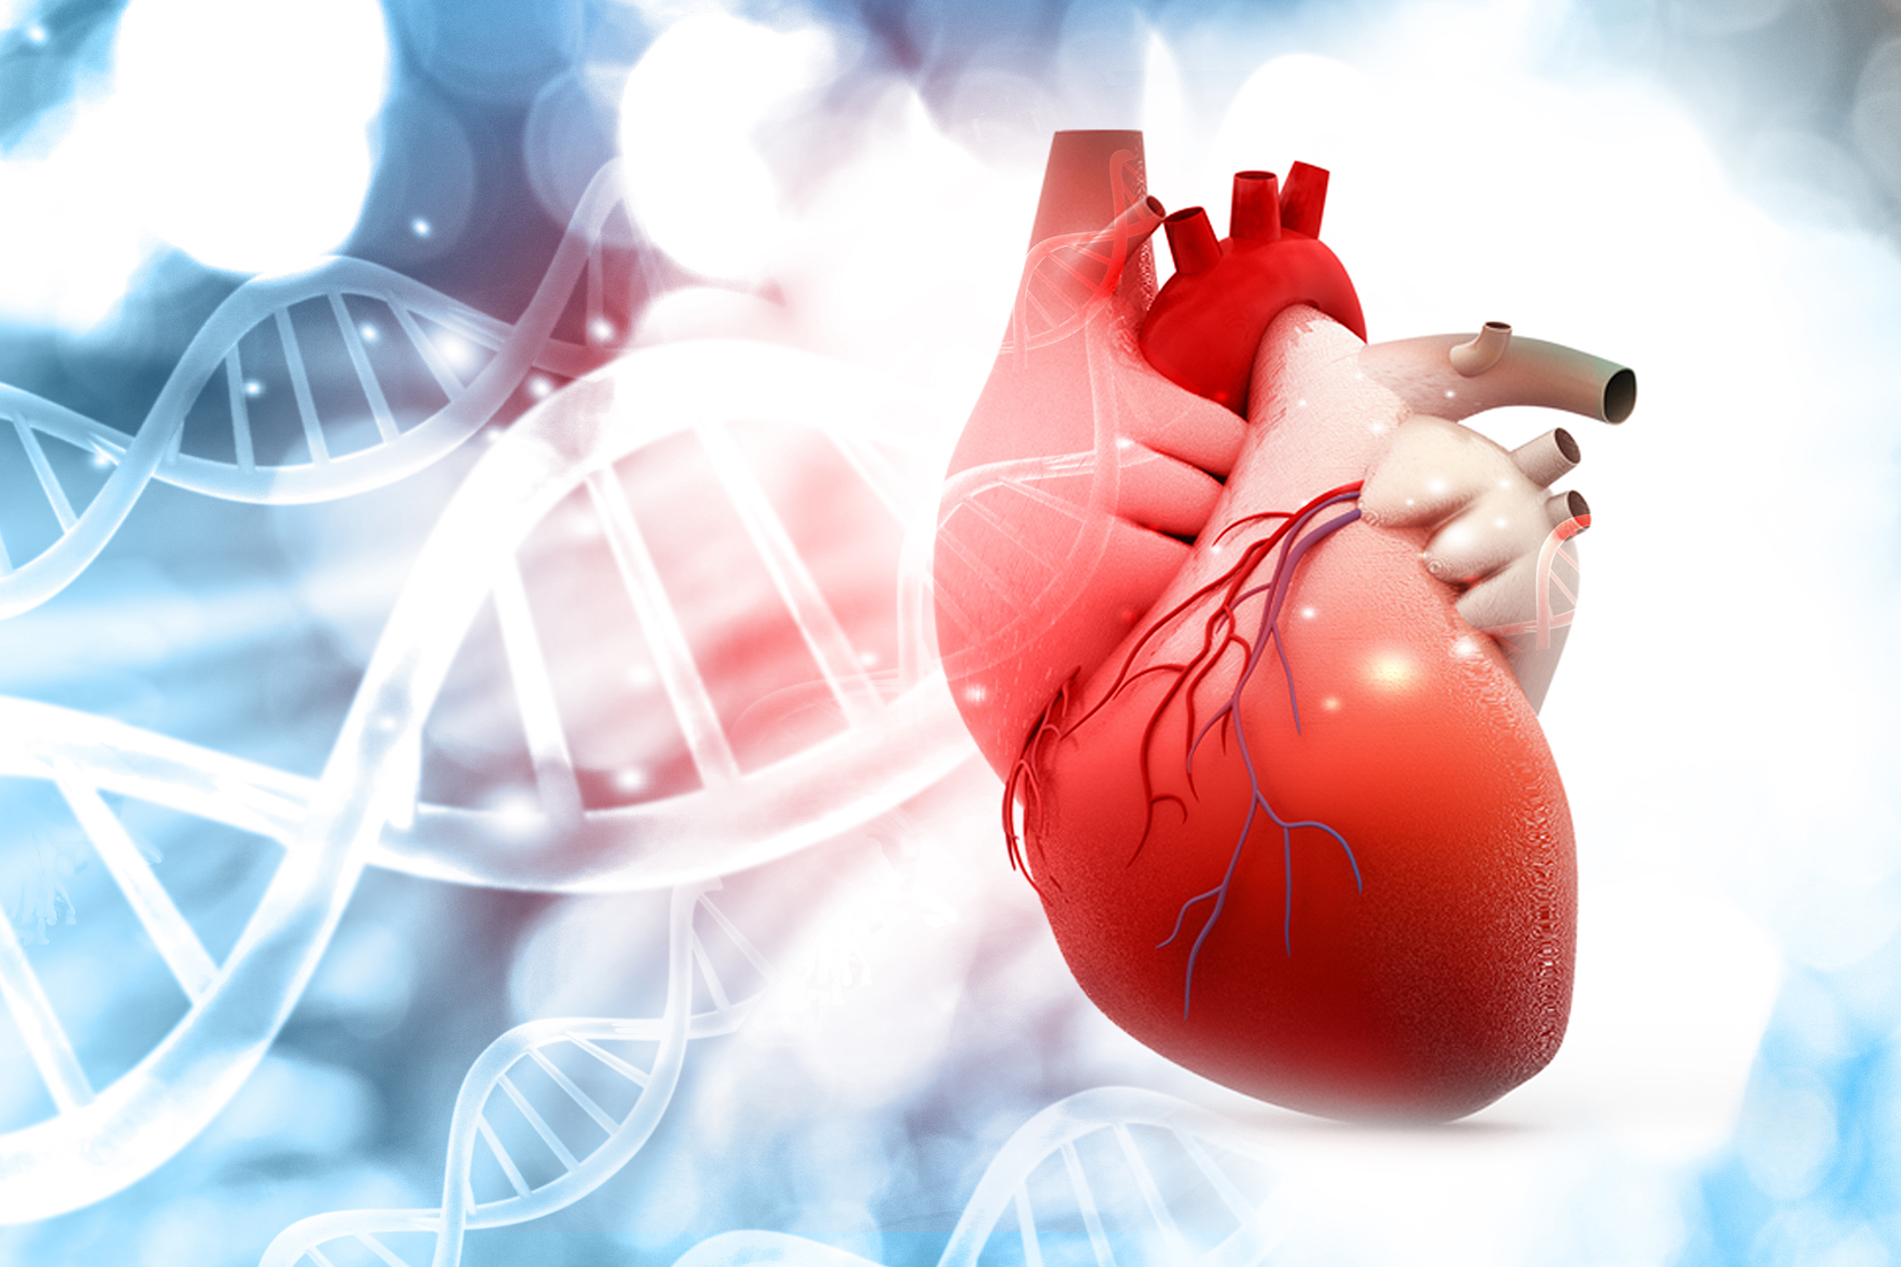 Abstract image of heart and DNA double helix